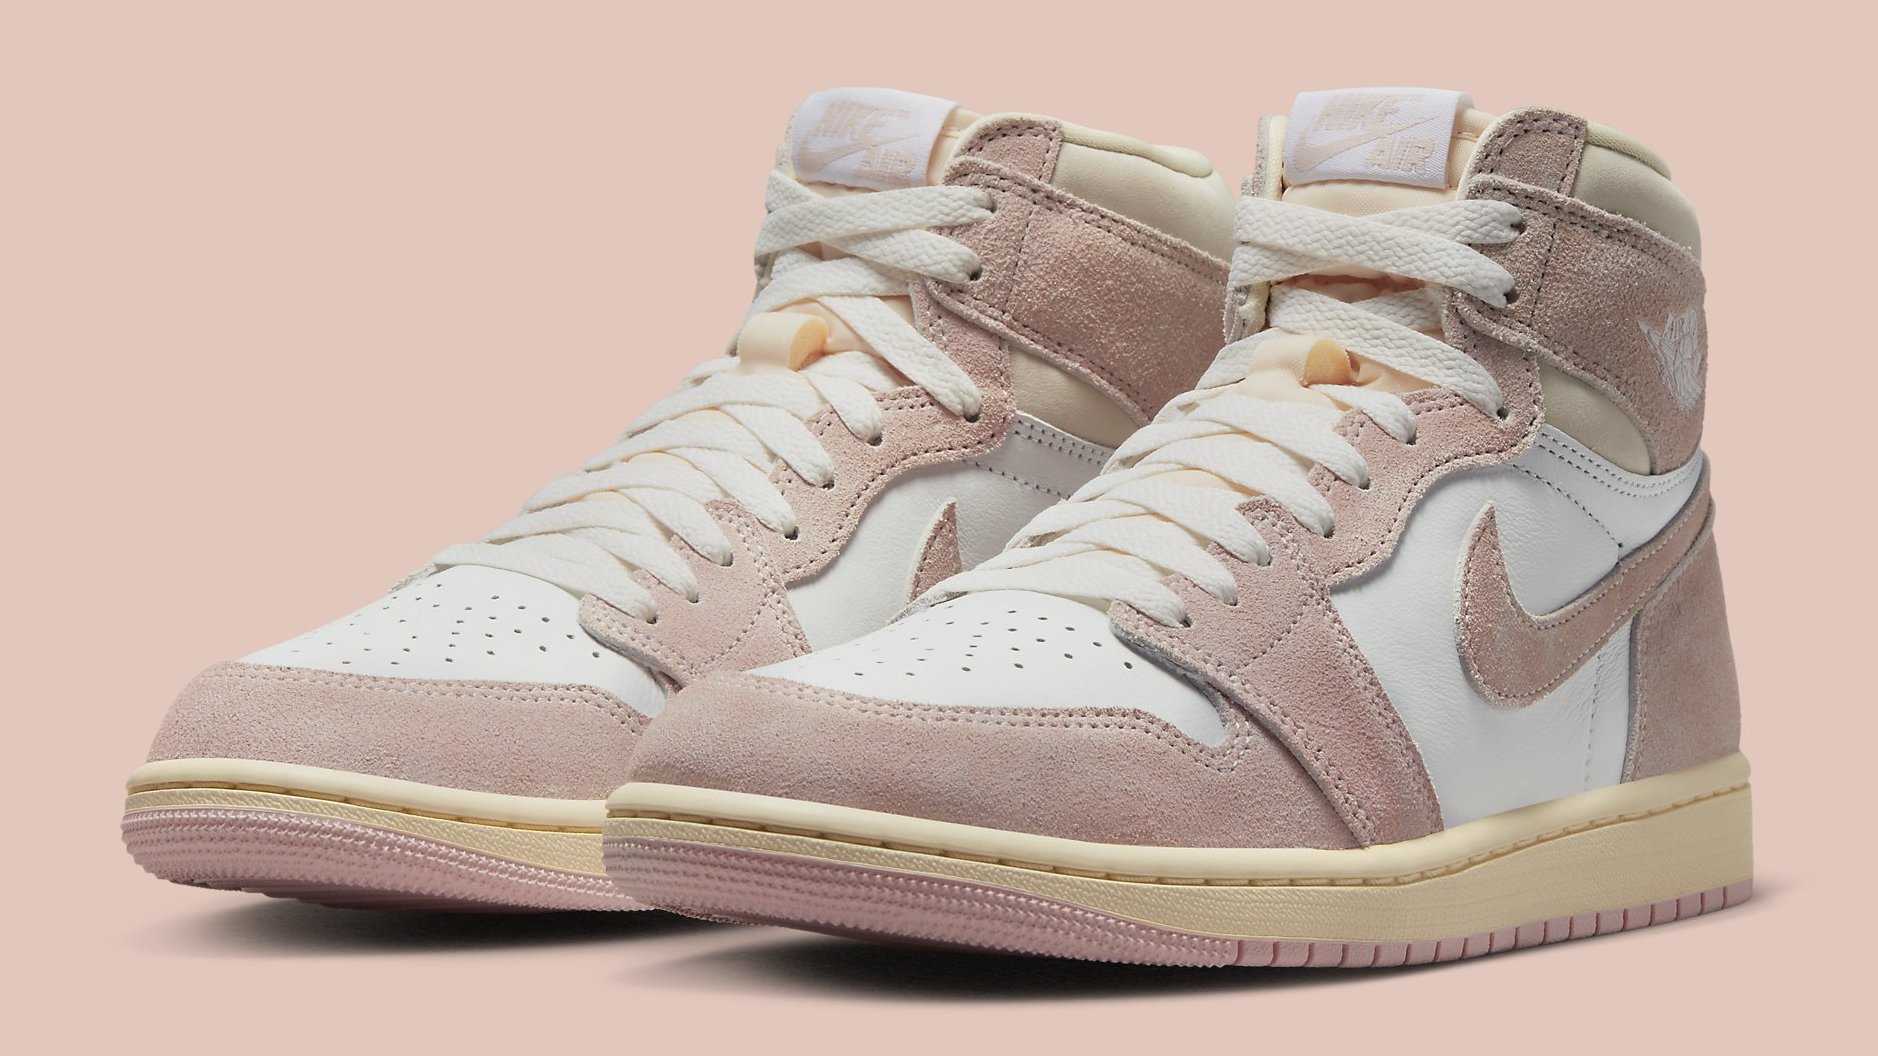 Washed Pink' Air Jordan 1 High Releases This Month   Complex